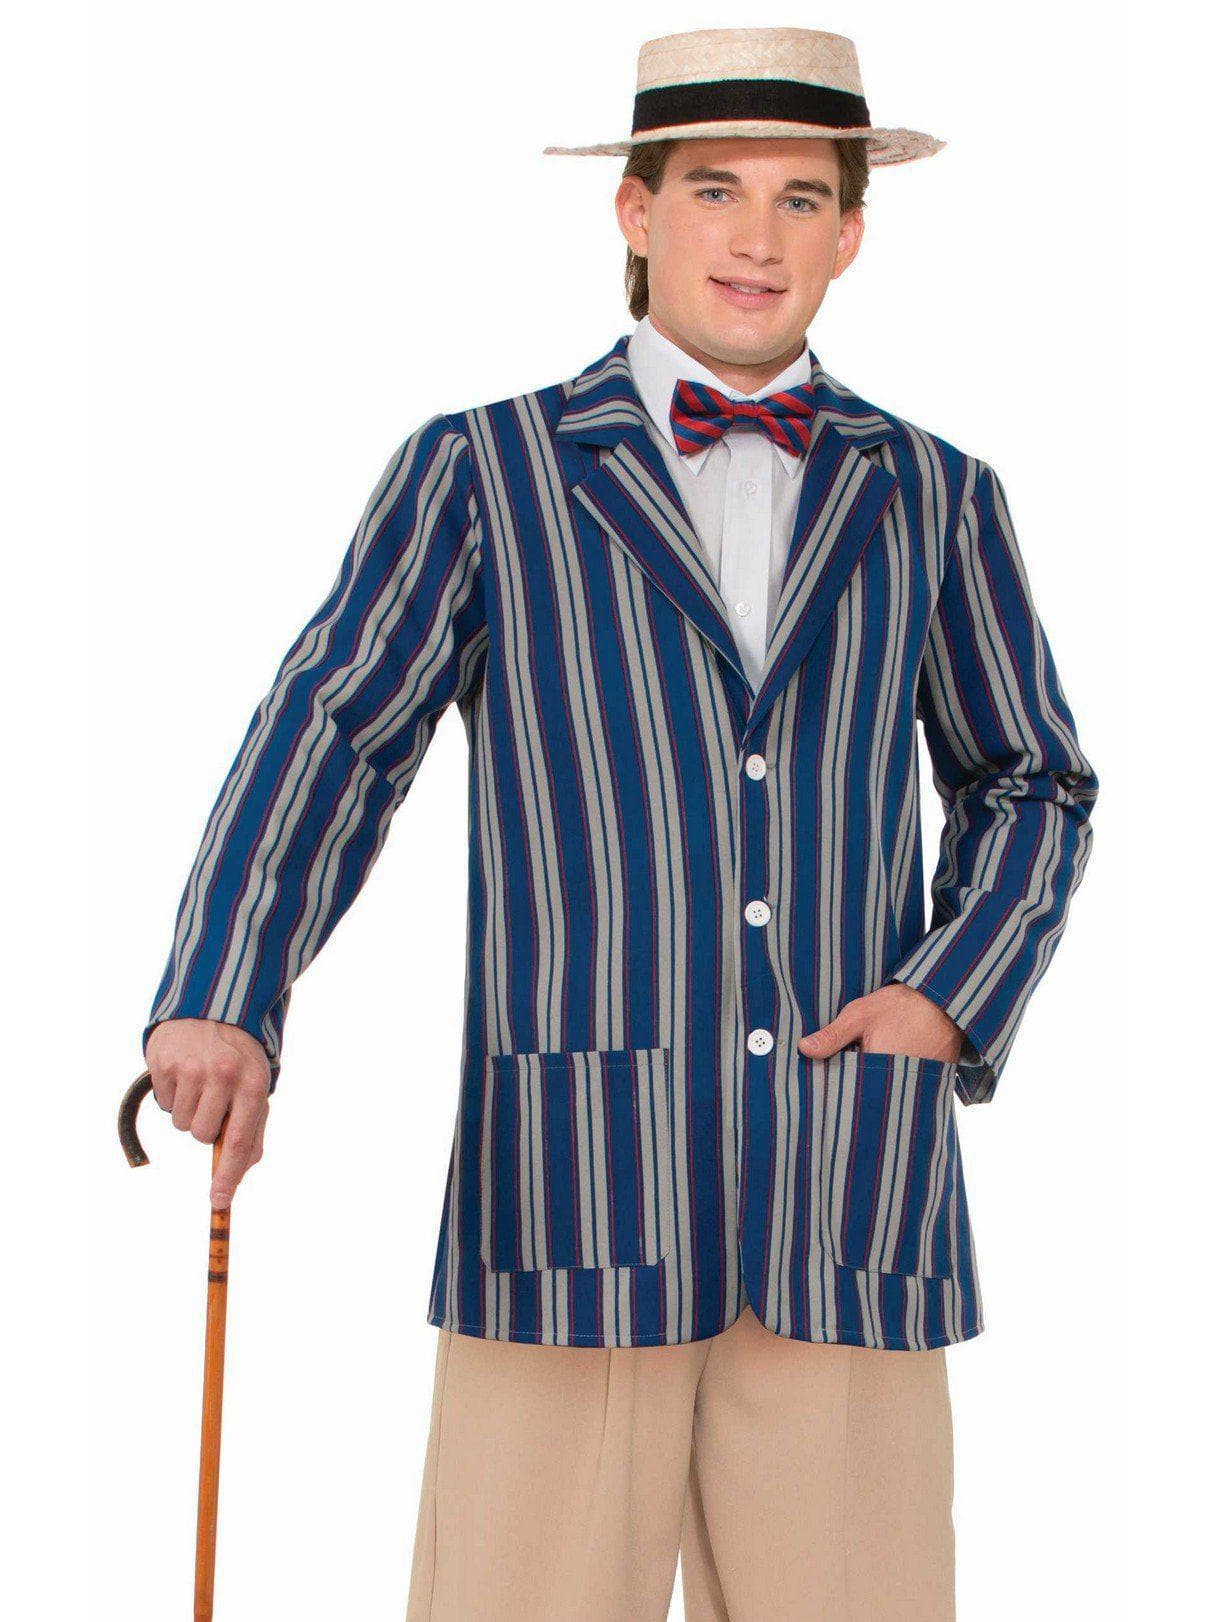 Adult Roaring 20's Boater Jacket Costume - costumes.com